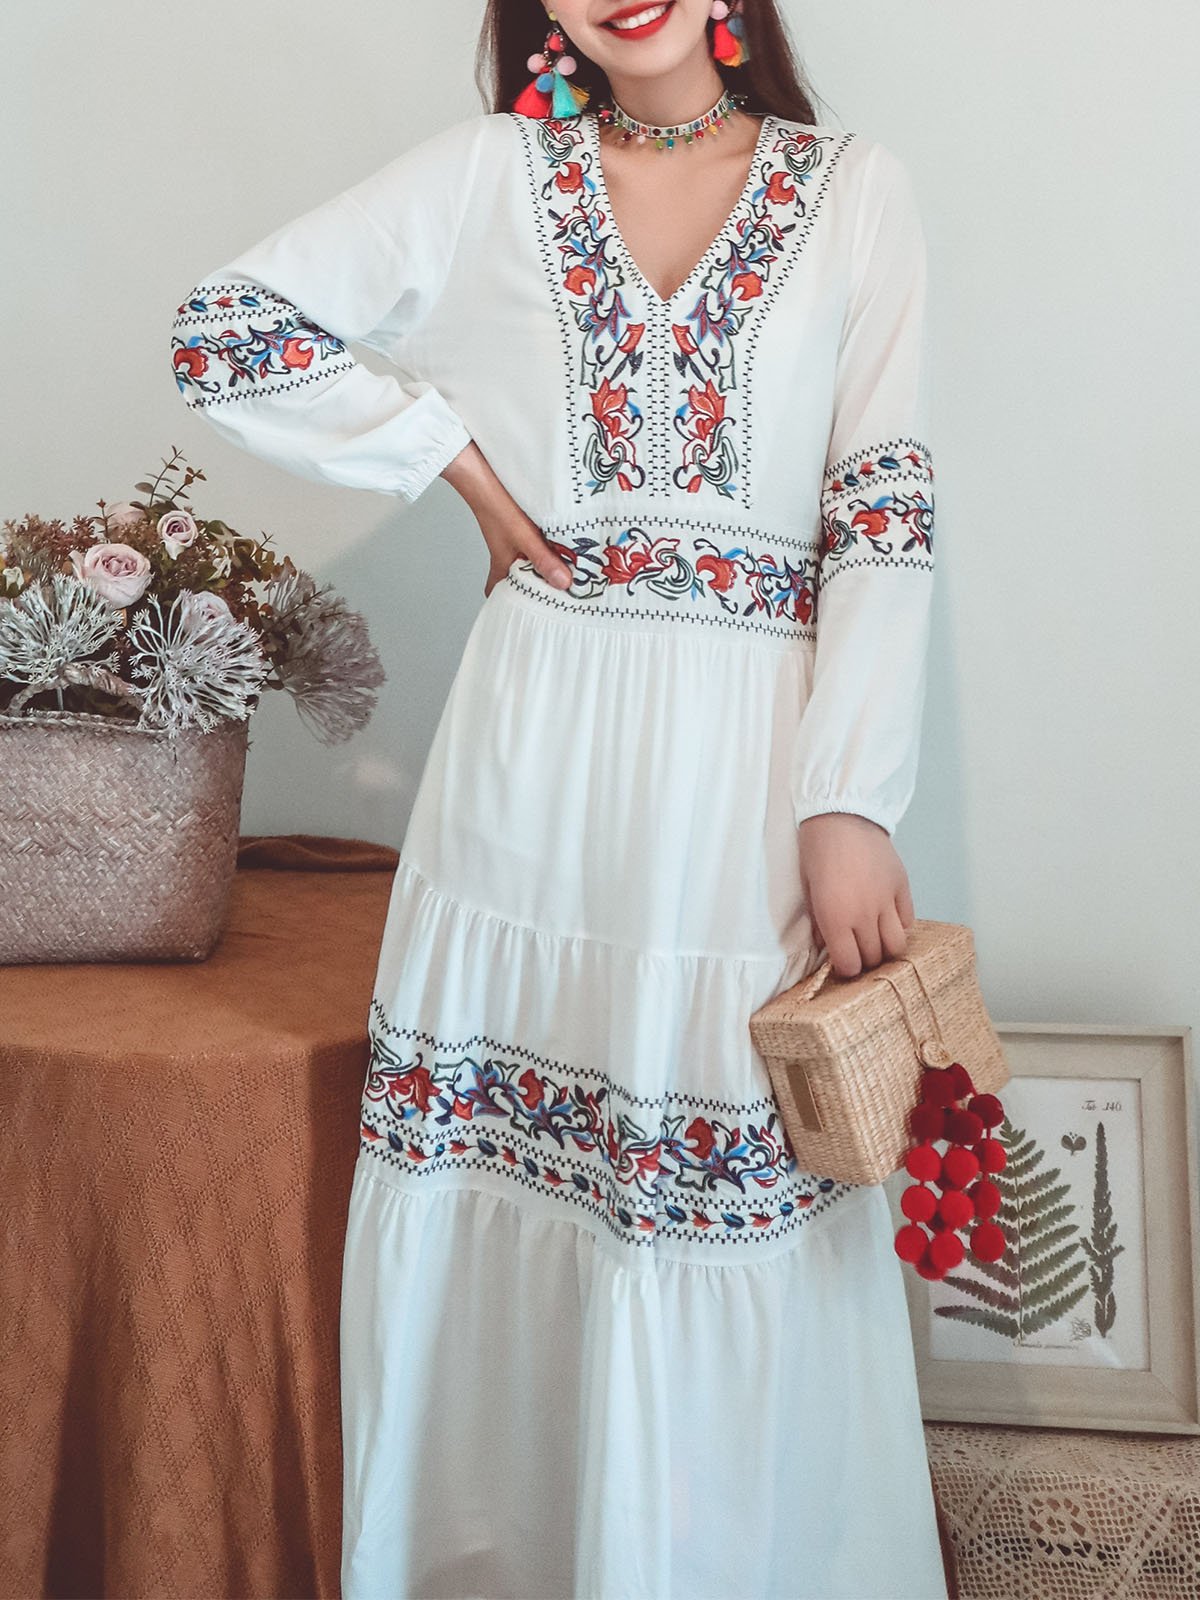 Jolly Vintage Women's Embroidered Floral V Neck Long Sleeves Boho Maxi Cotton Dress